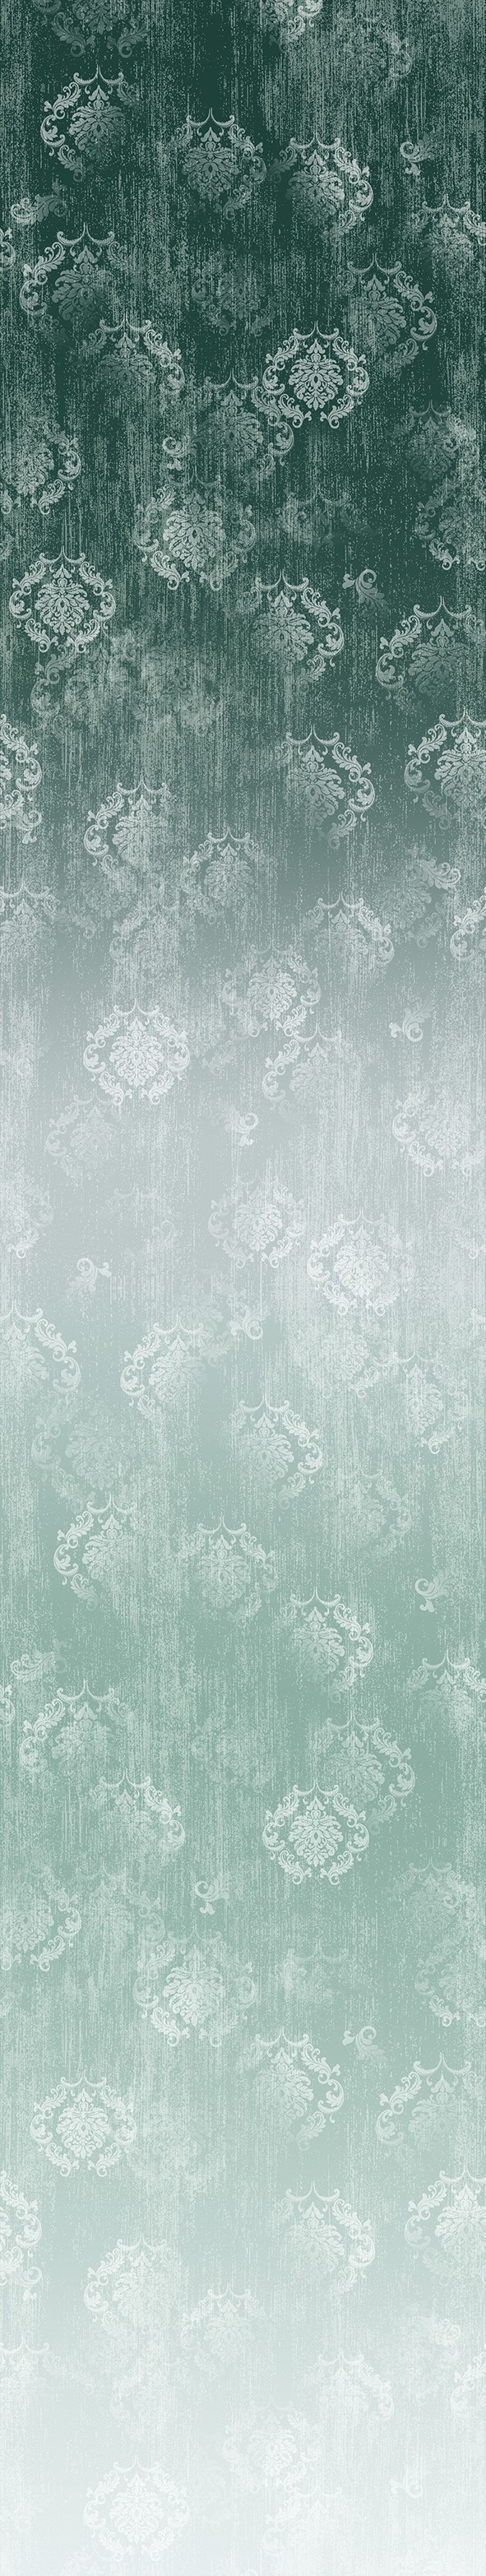 Timeless ombre digital print fabric in blue green tones